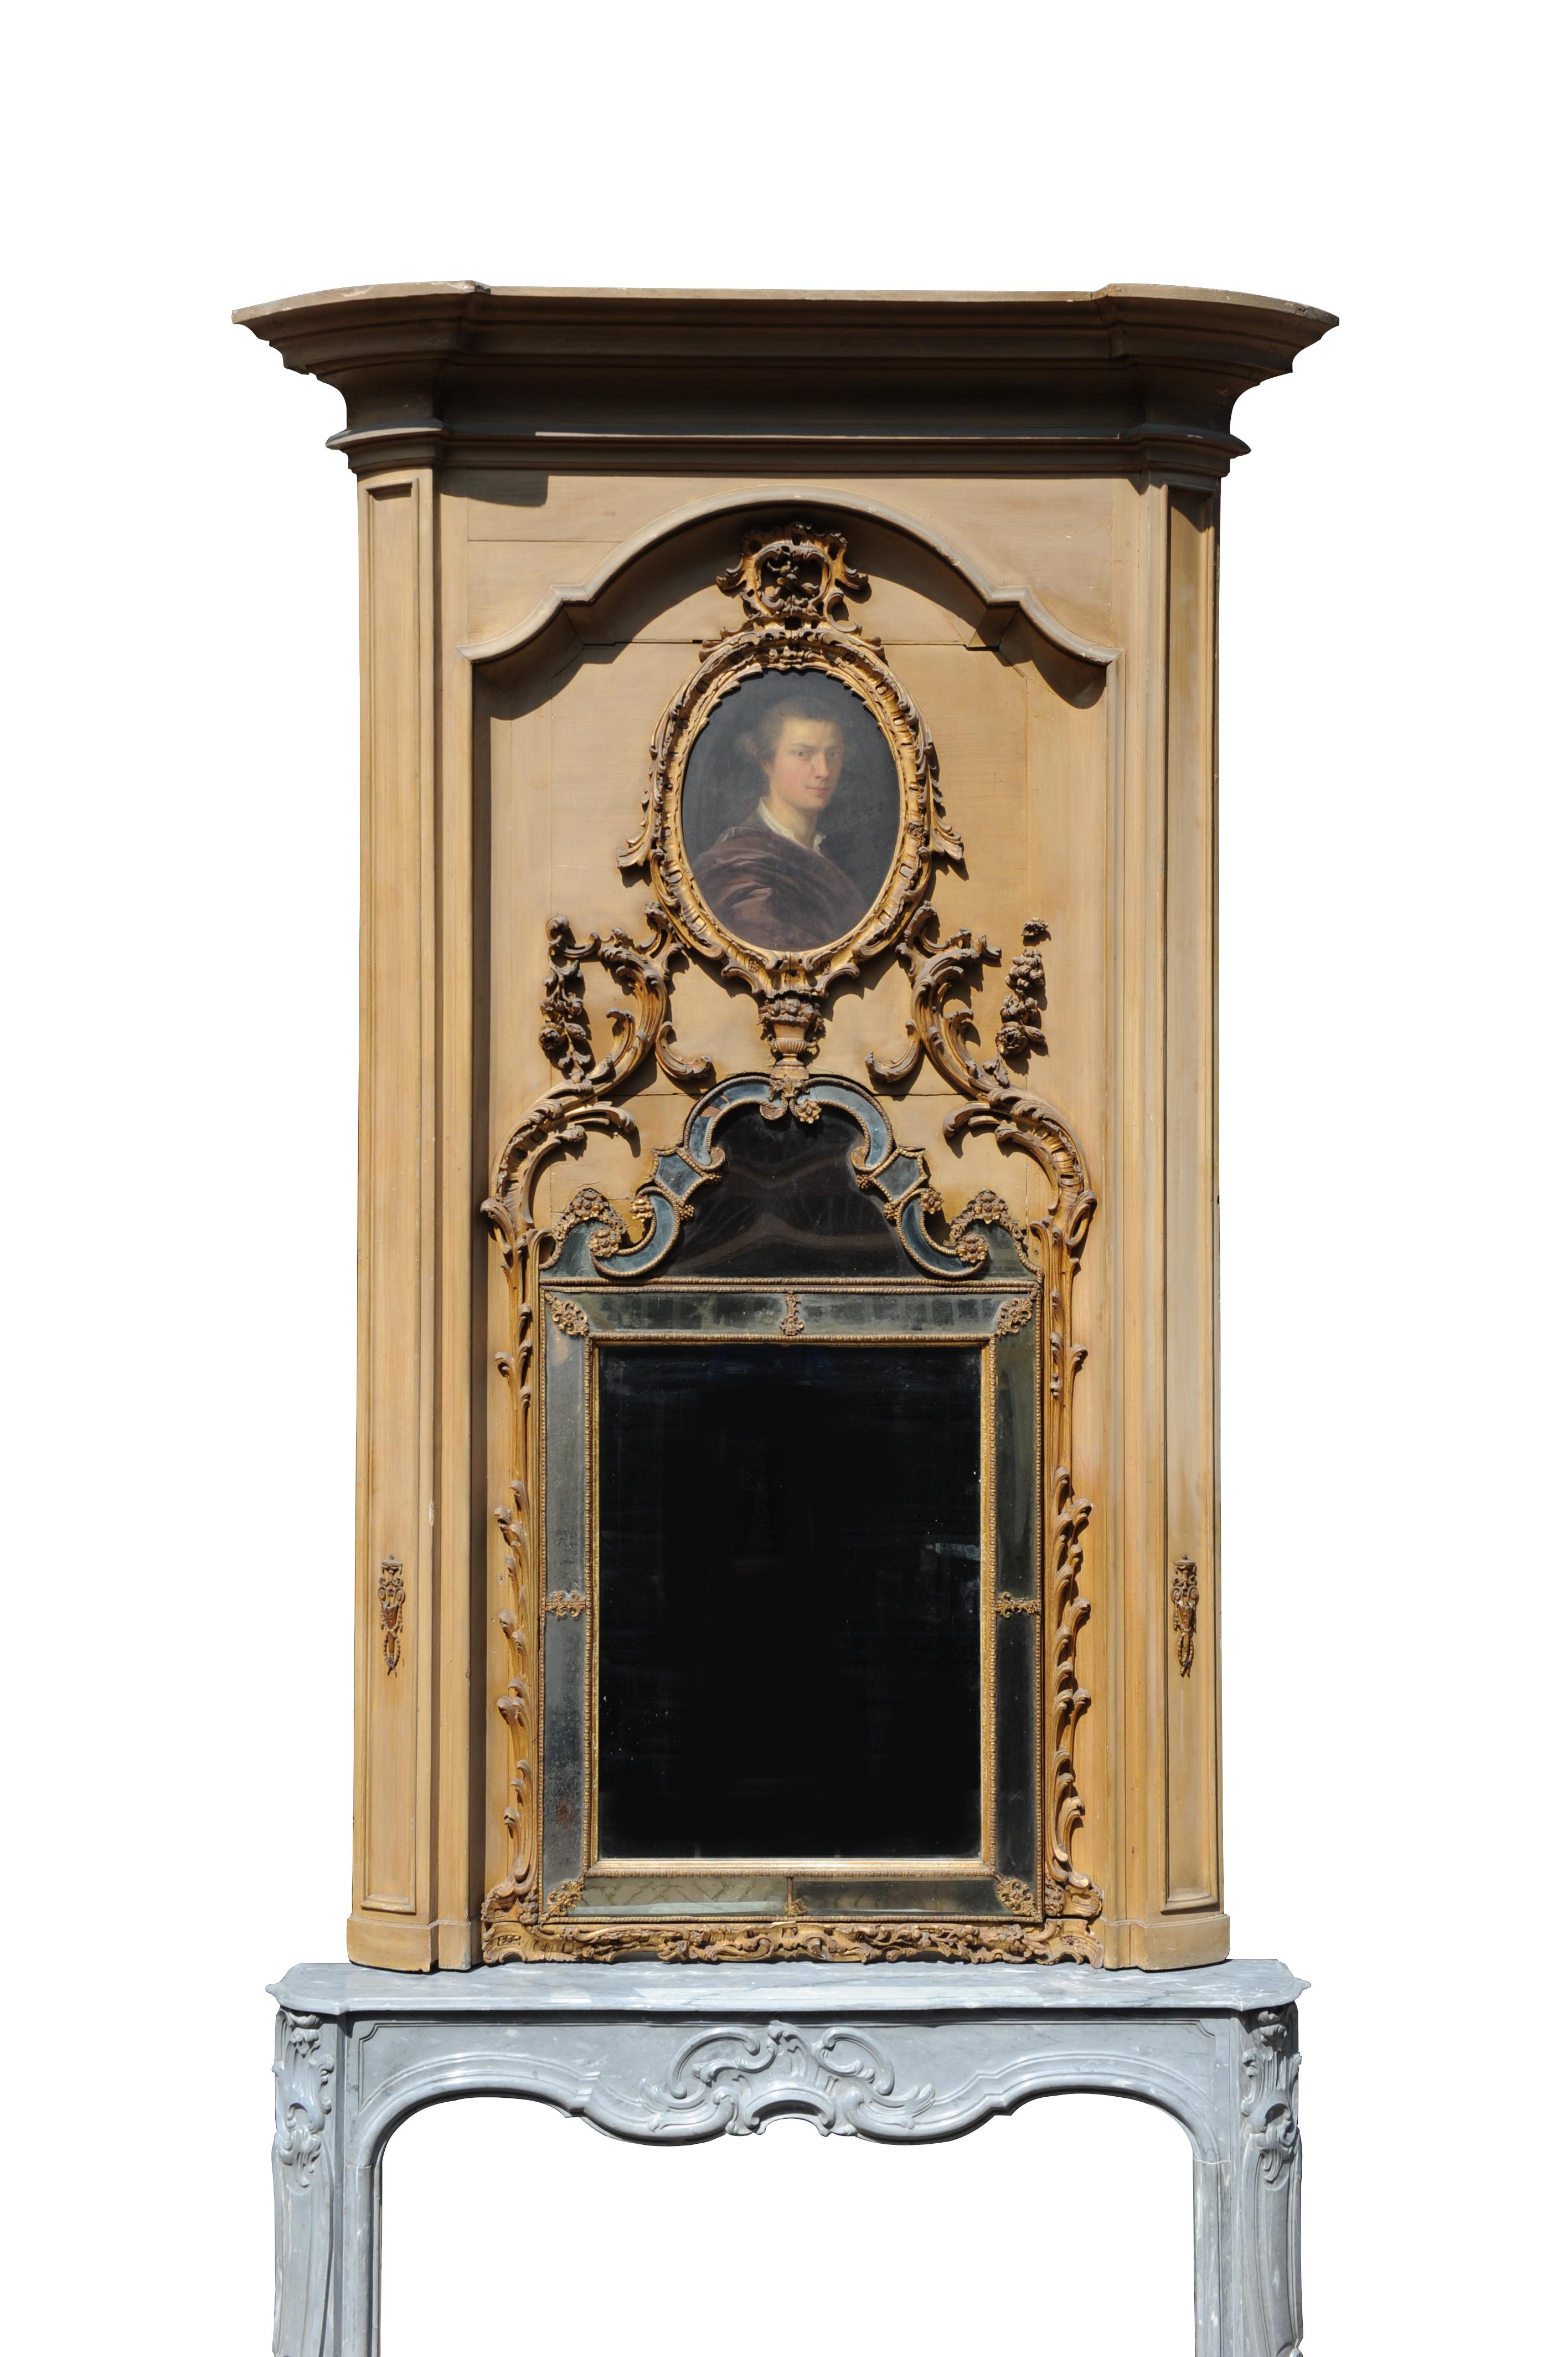 Exceptional Dutch Rococo Fireplace Mantel with Original Trumeau In Good Condition For Sale In Haarlem, Noord-Holland